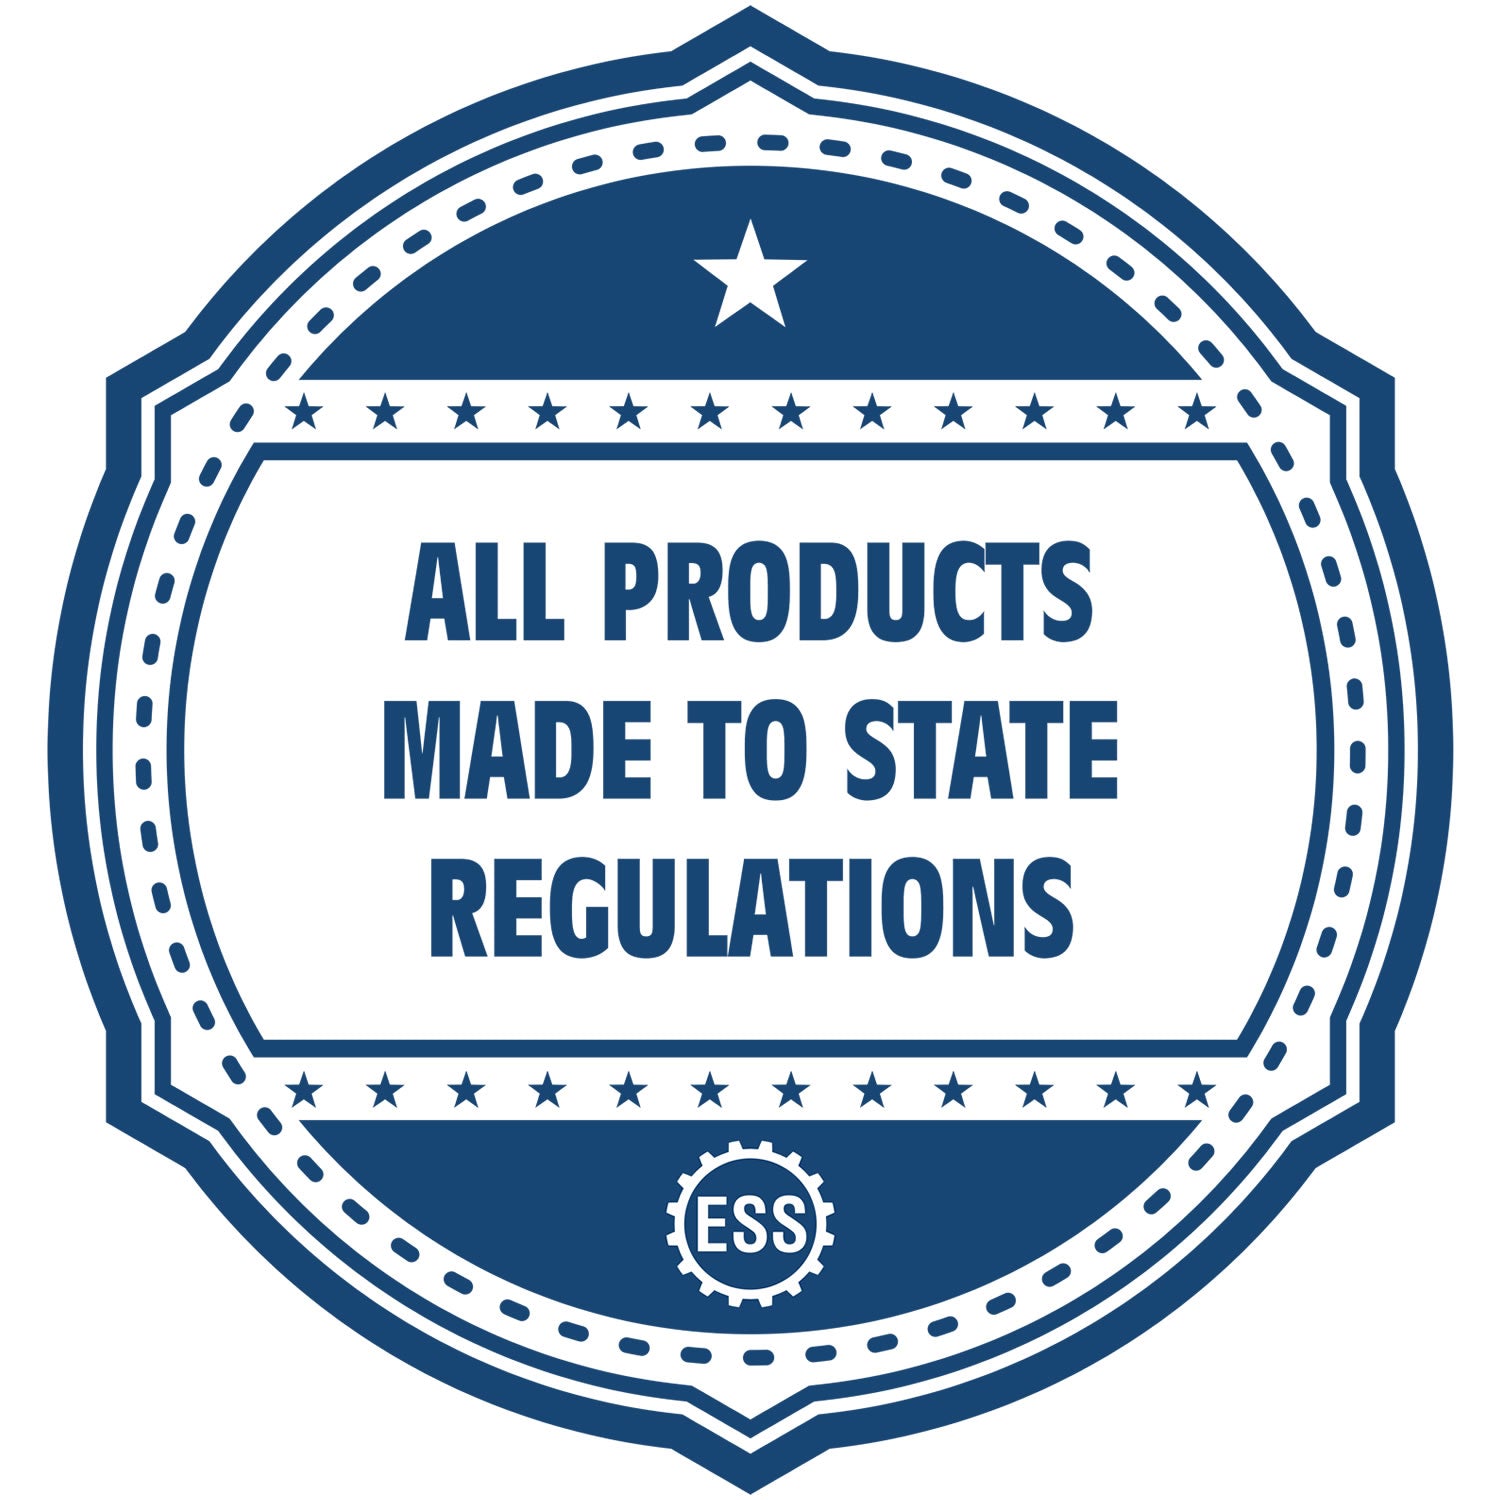 An icon or badge element for the Premium MaxLight Pre-Inked District of Columbia Engineering Stamp showing that this product is made in compliance with state regulations.